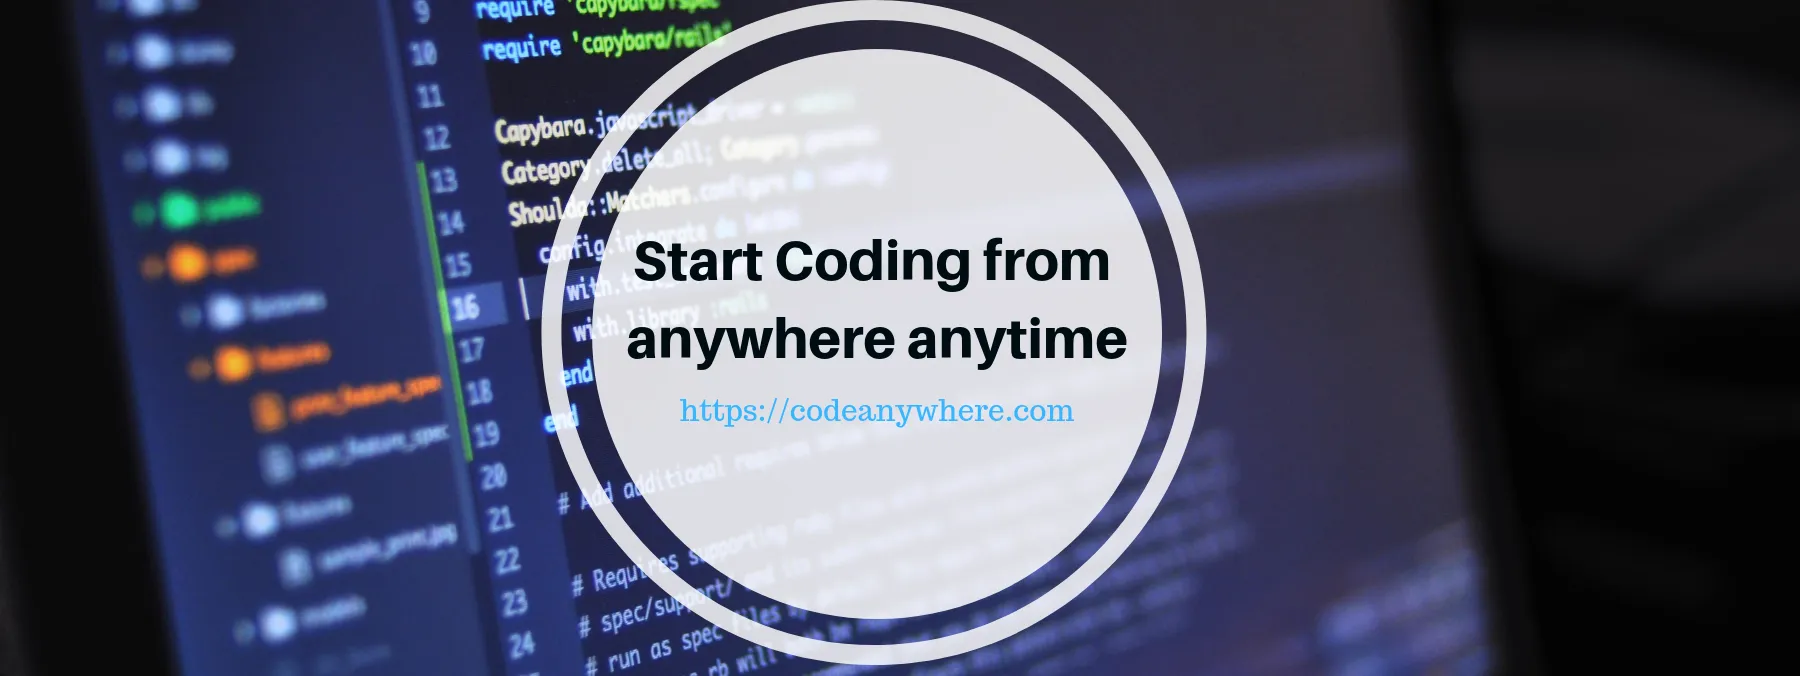 Start Coding from anywhere anytime